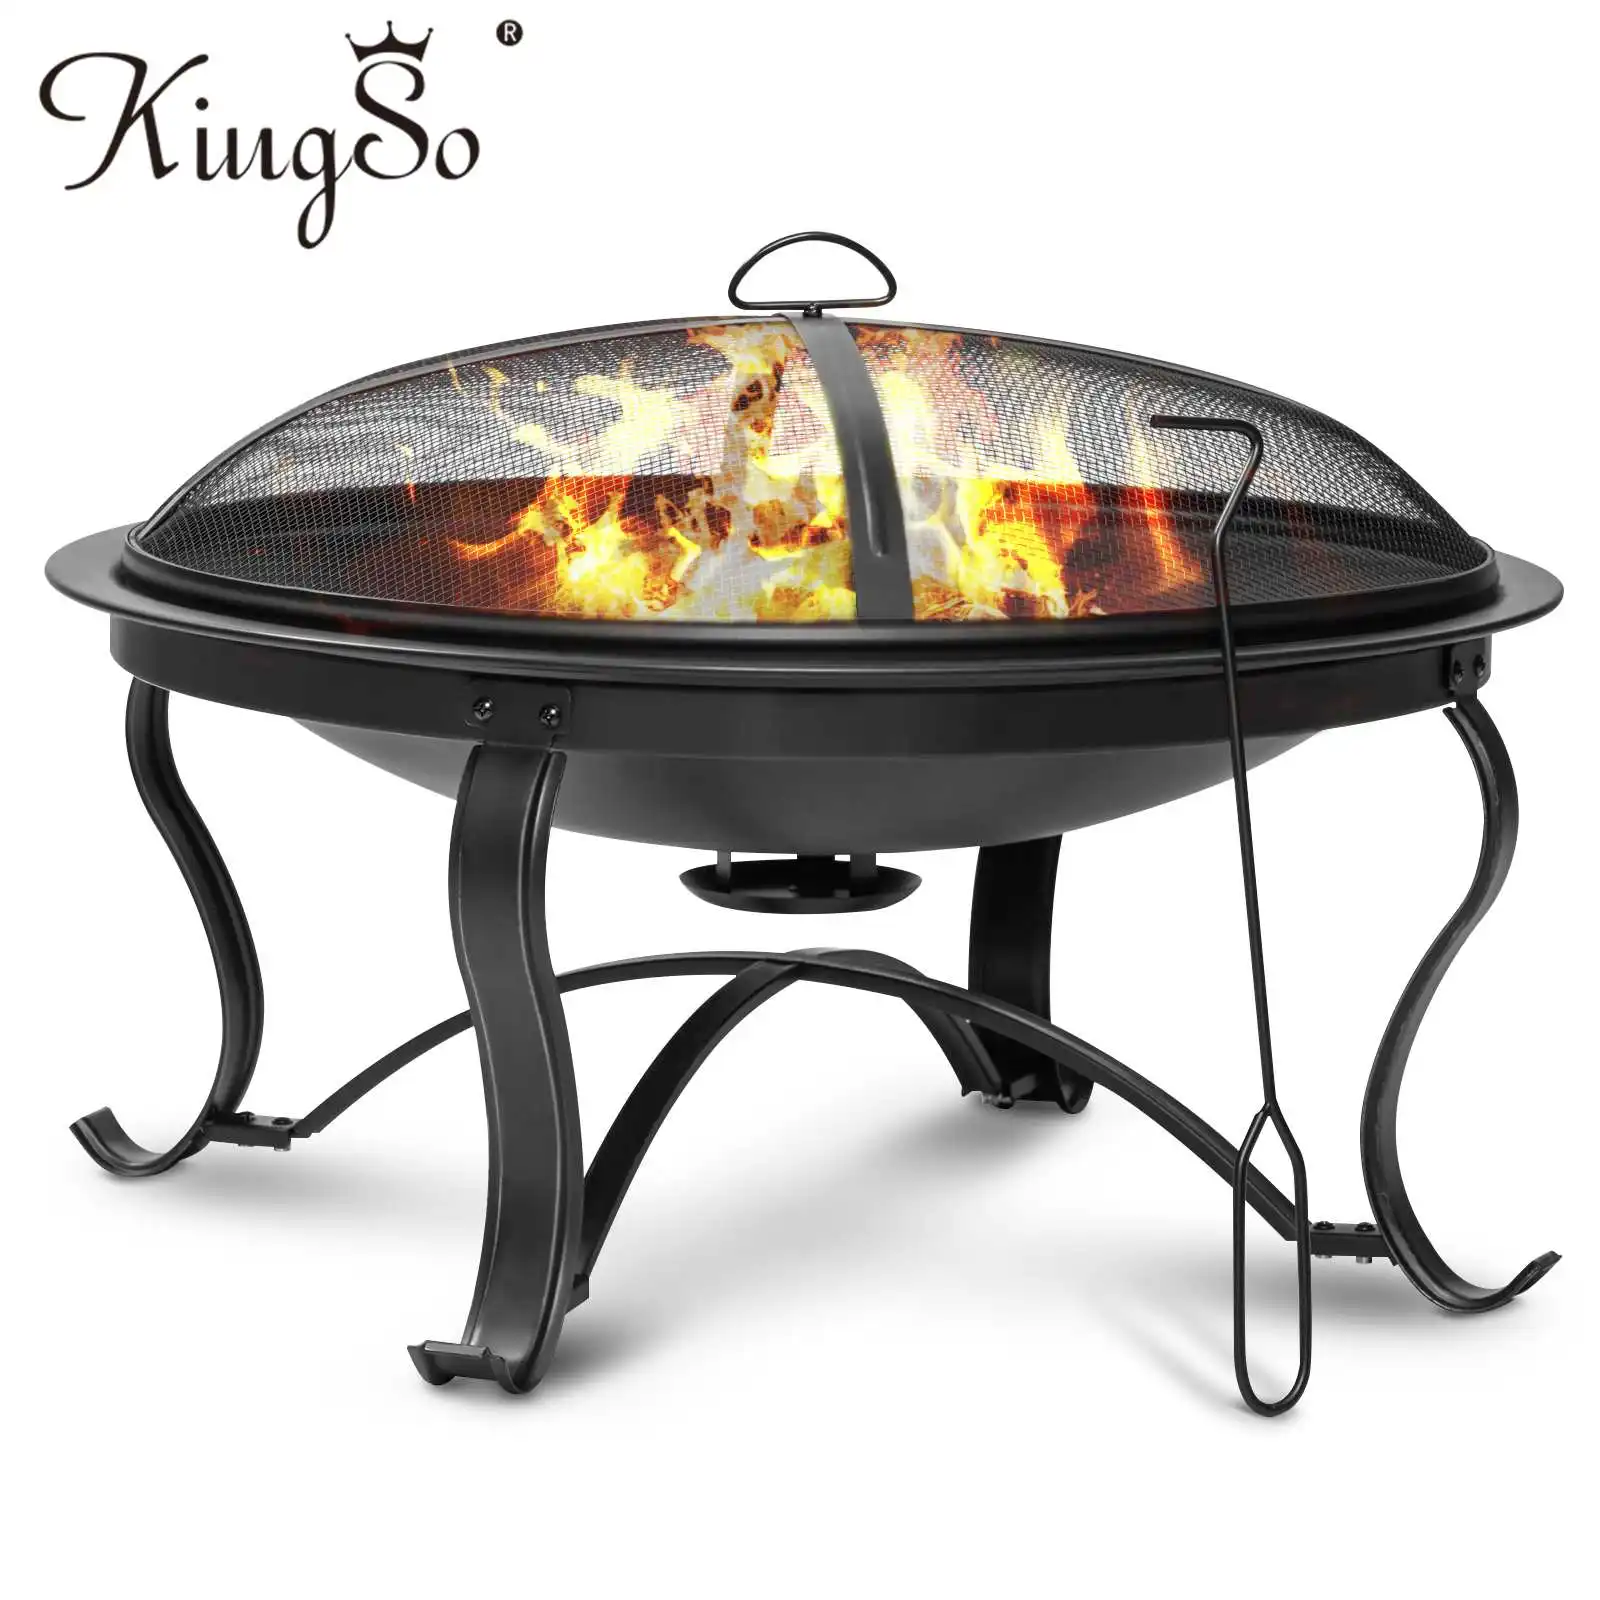 

KINGSO Fire Pit 30 Inch Wood Burning Fire Pit Steel Outdoor Fire Pits BBQ Firepit Bowl Backyard Patio Camping Picnic Barbecue